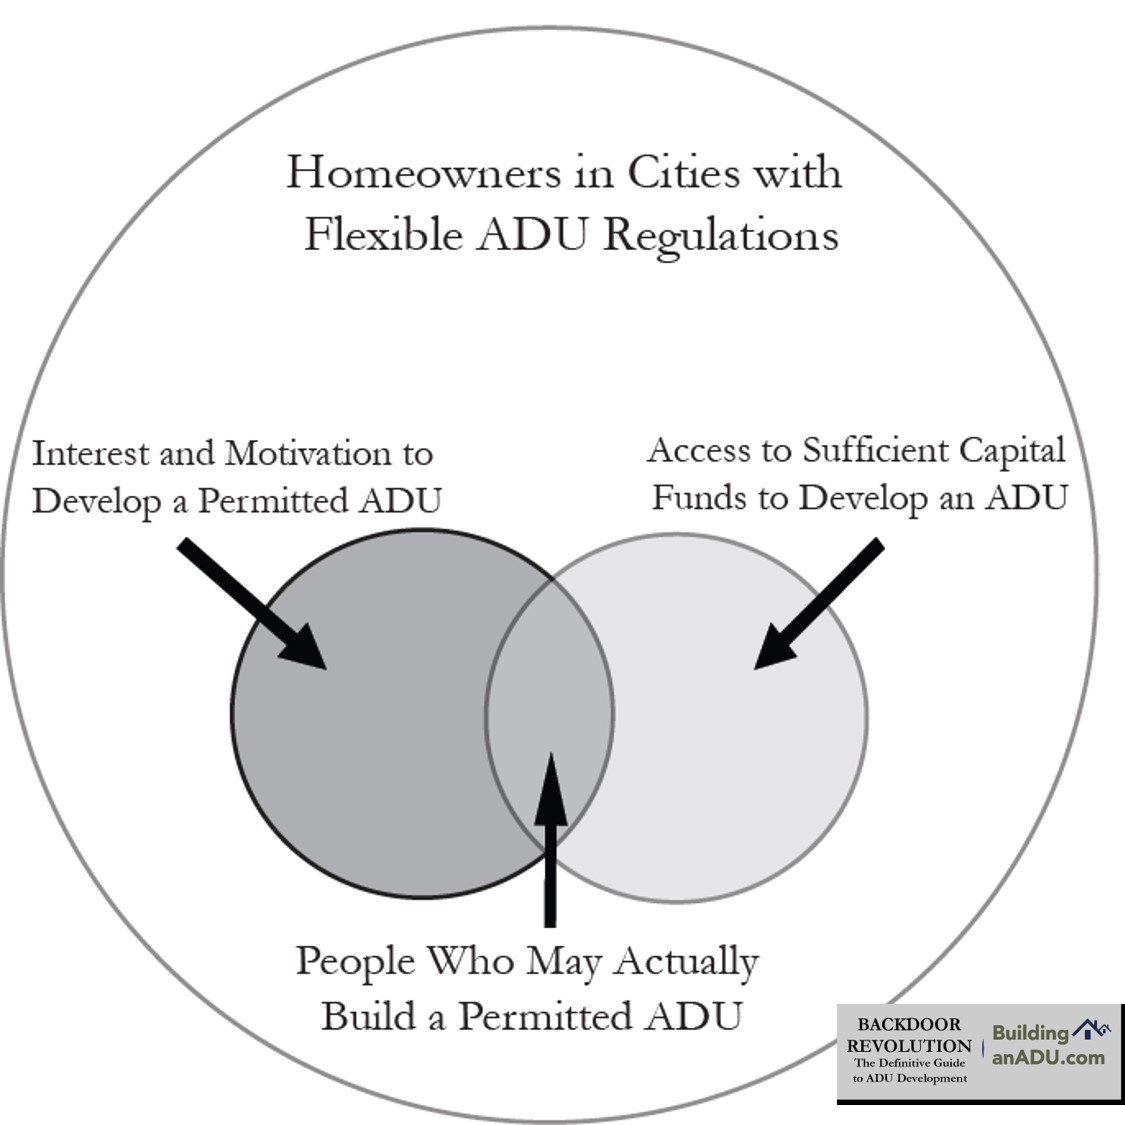  Backdoor Revolution provides a prescriptionto help cities increase the adoption of permitted ADUs.&nbsp; 